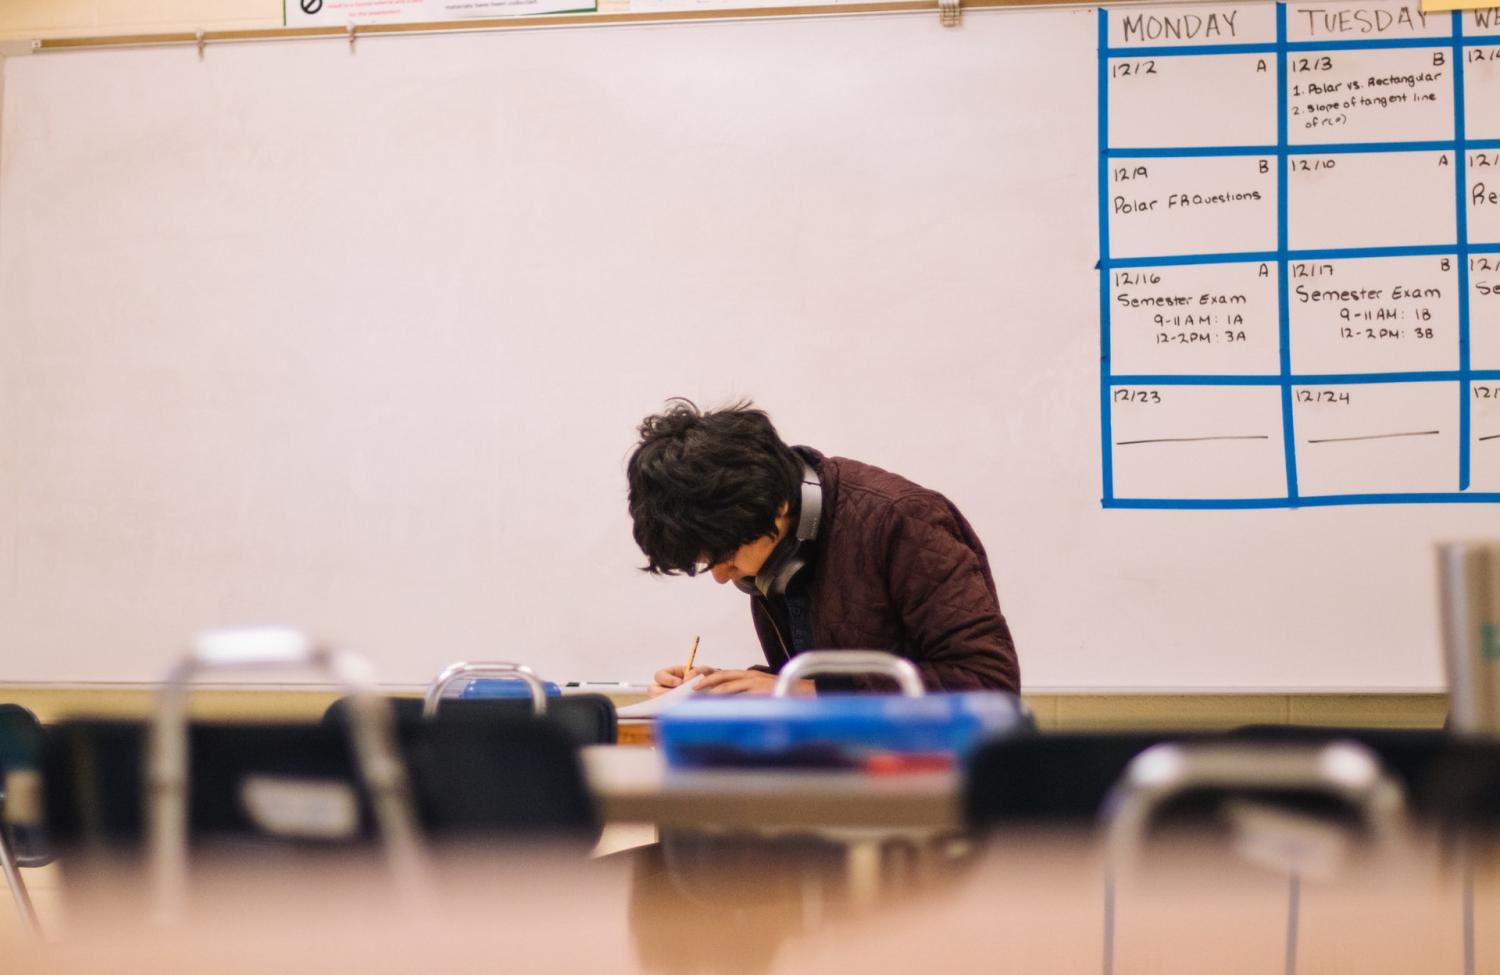 Male student working at desk in front of a whiteboard in a classroom.